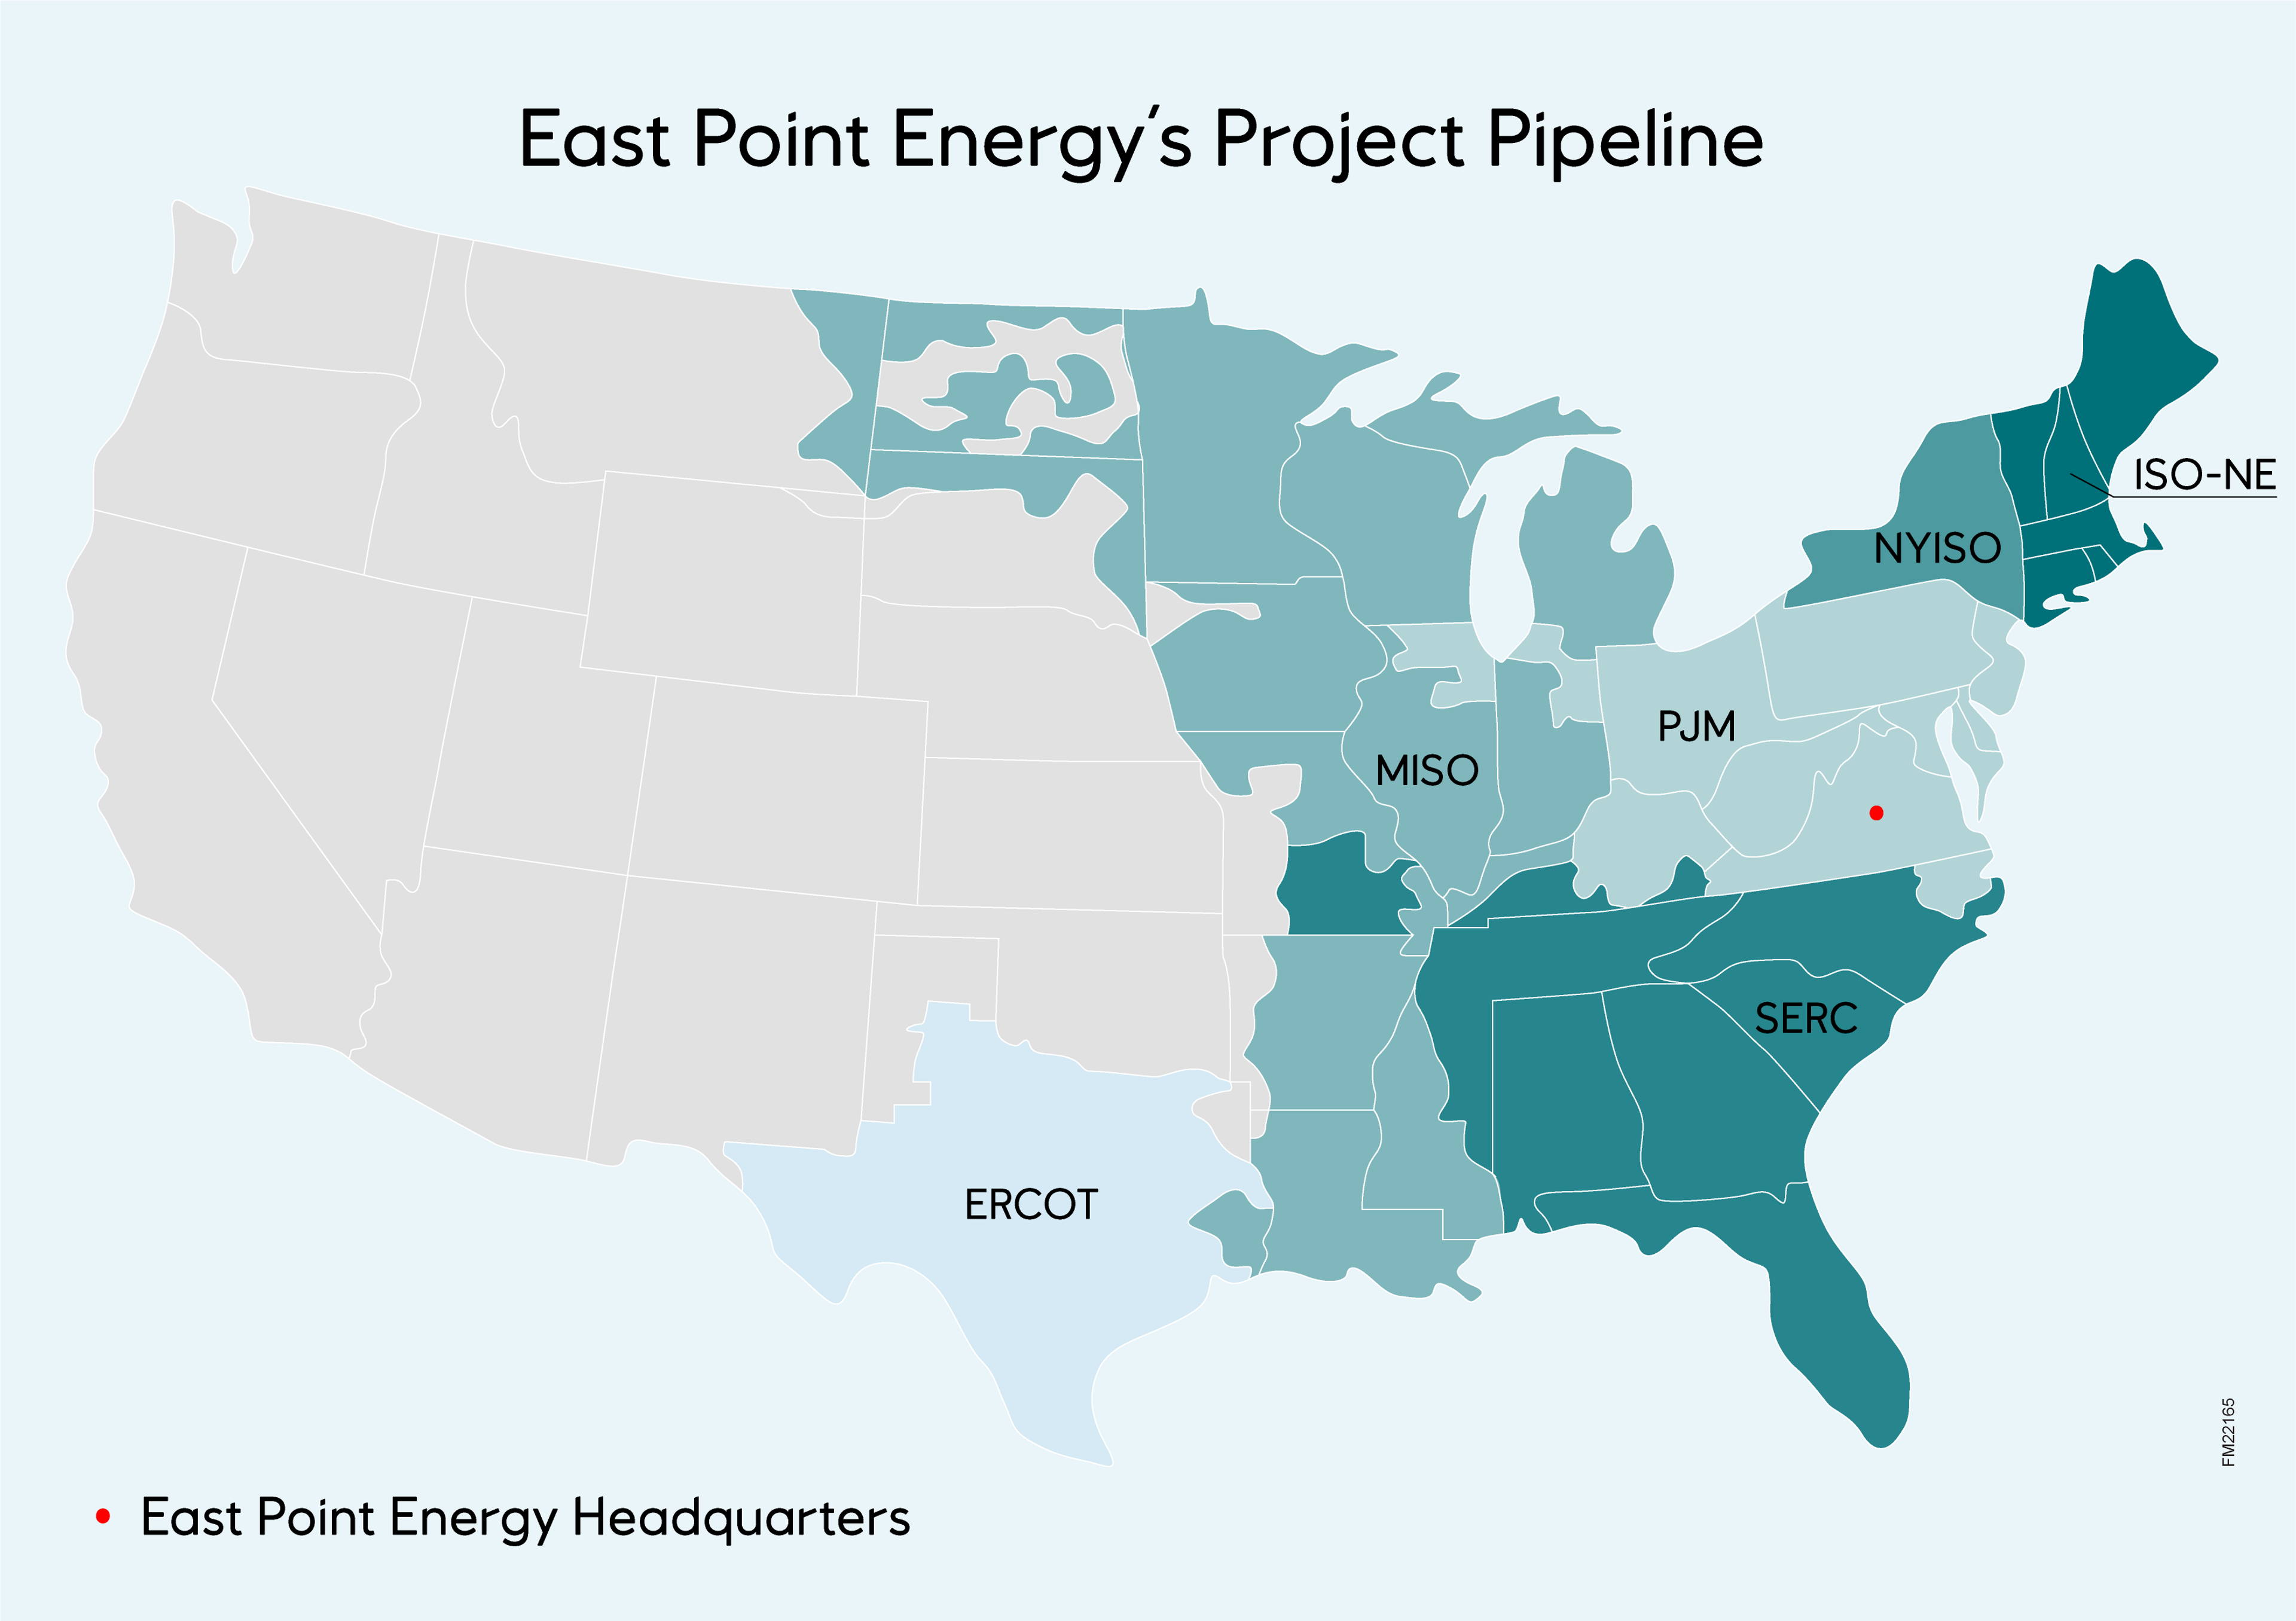 Map showing US power markets where East Point Energy operates